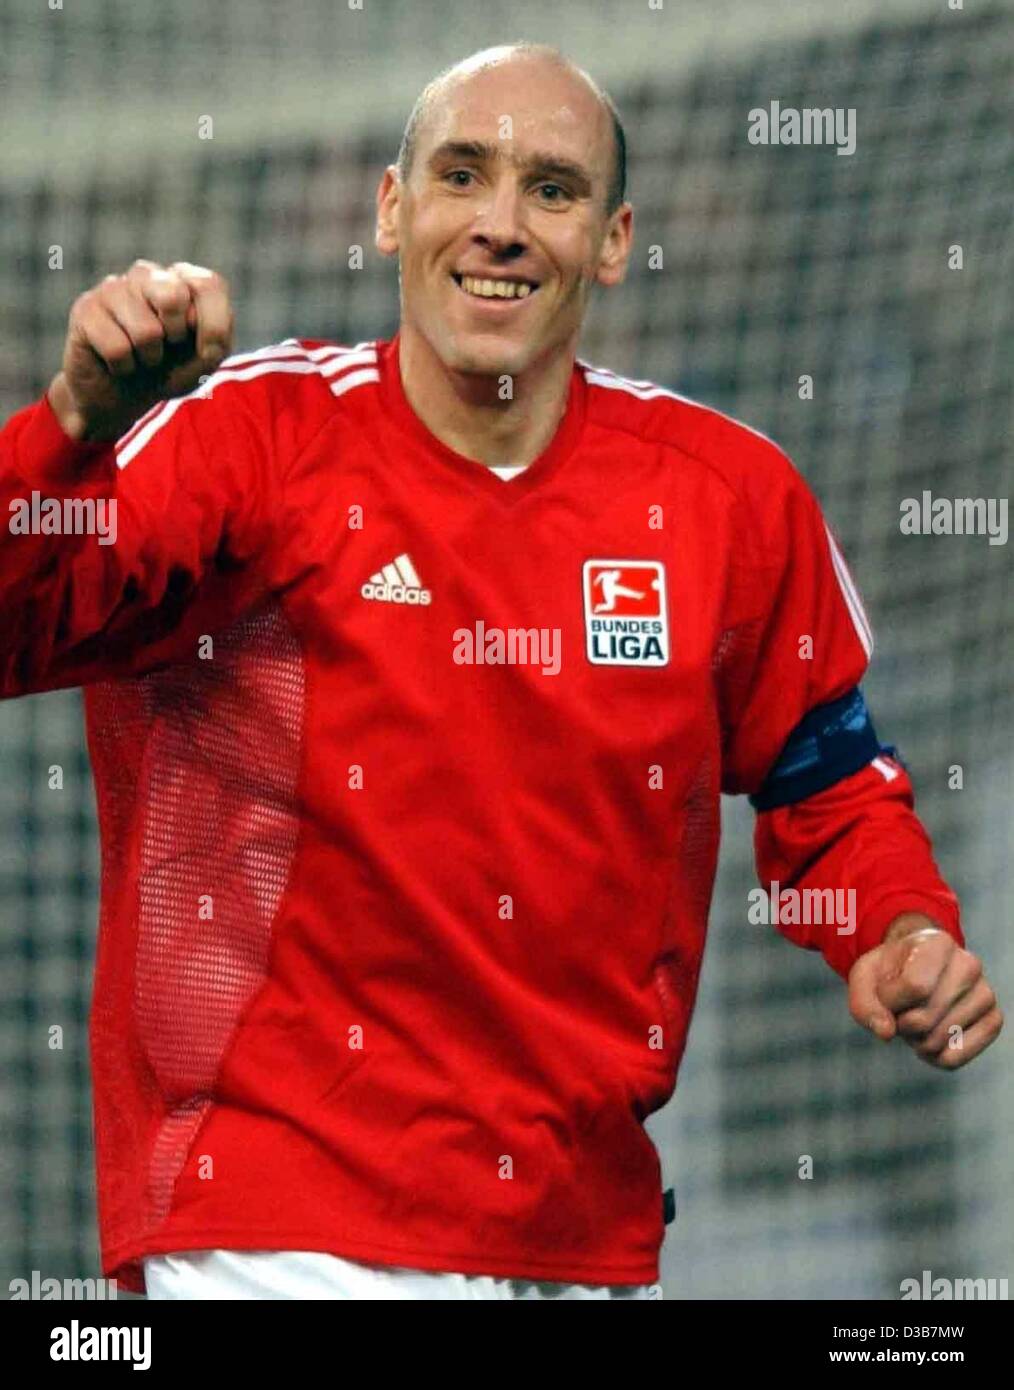 (dpa) - Jan Koller of the 'Bundesliga Allstars' team is celebrating his equalising 2-2 goal, Gelsenkirchen, Germany, 16 December 2002. The German players conquered a team of foreigners playing for German clubs 4-2. The proceeds of 3.5 million euros are for the benefit of football clubs that were dam Stock Photo